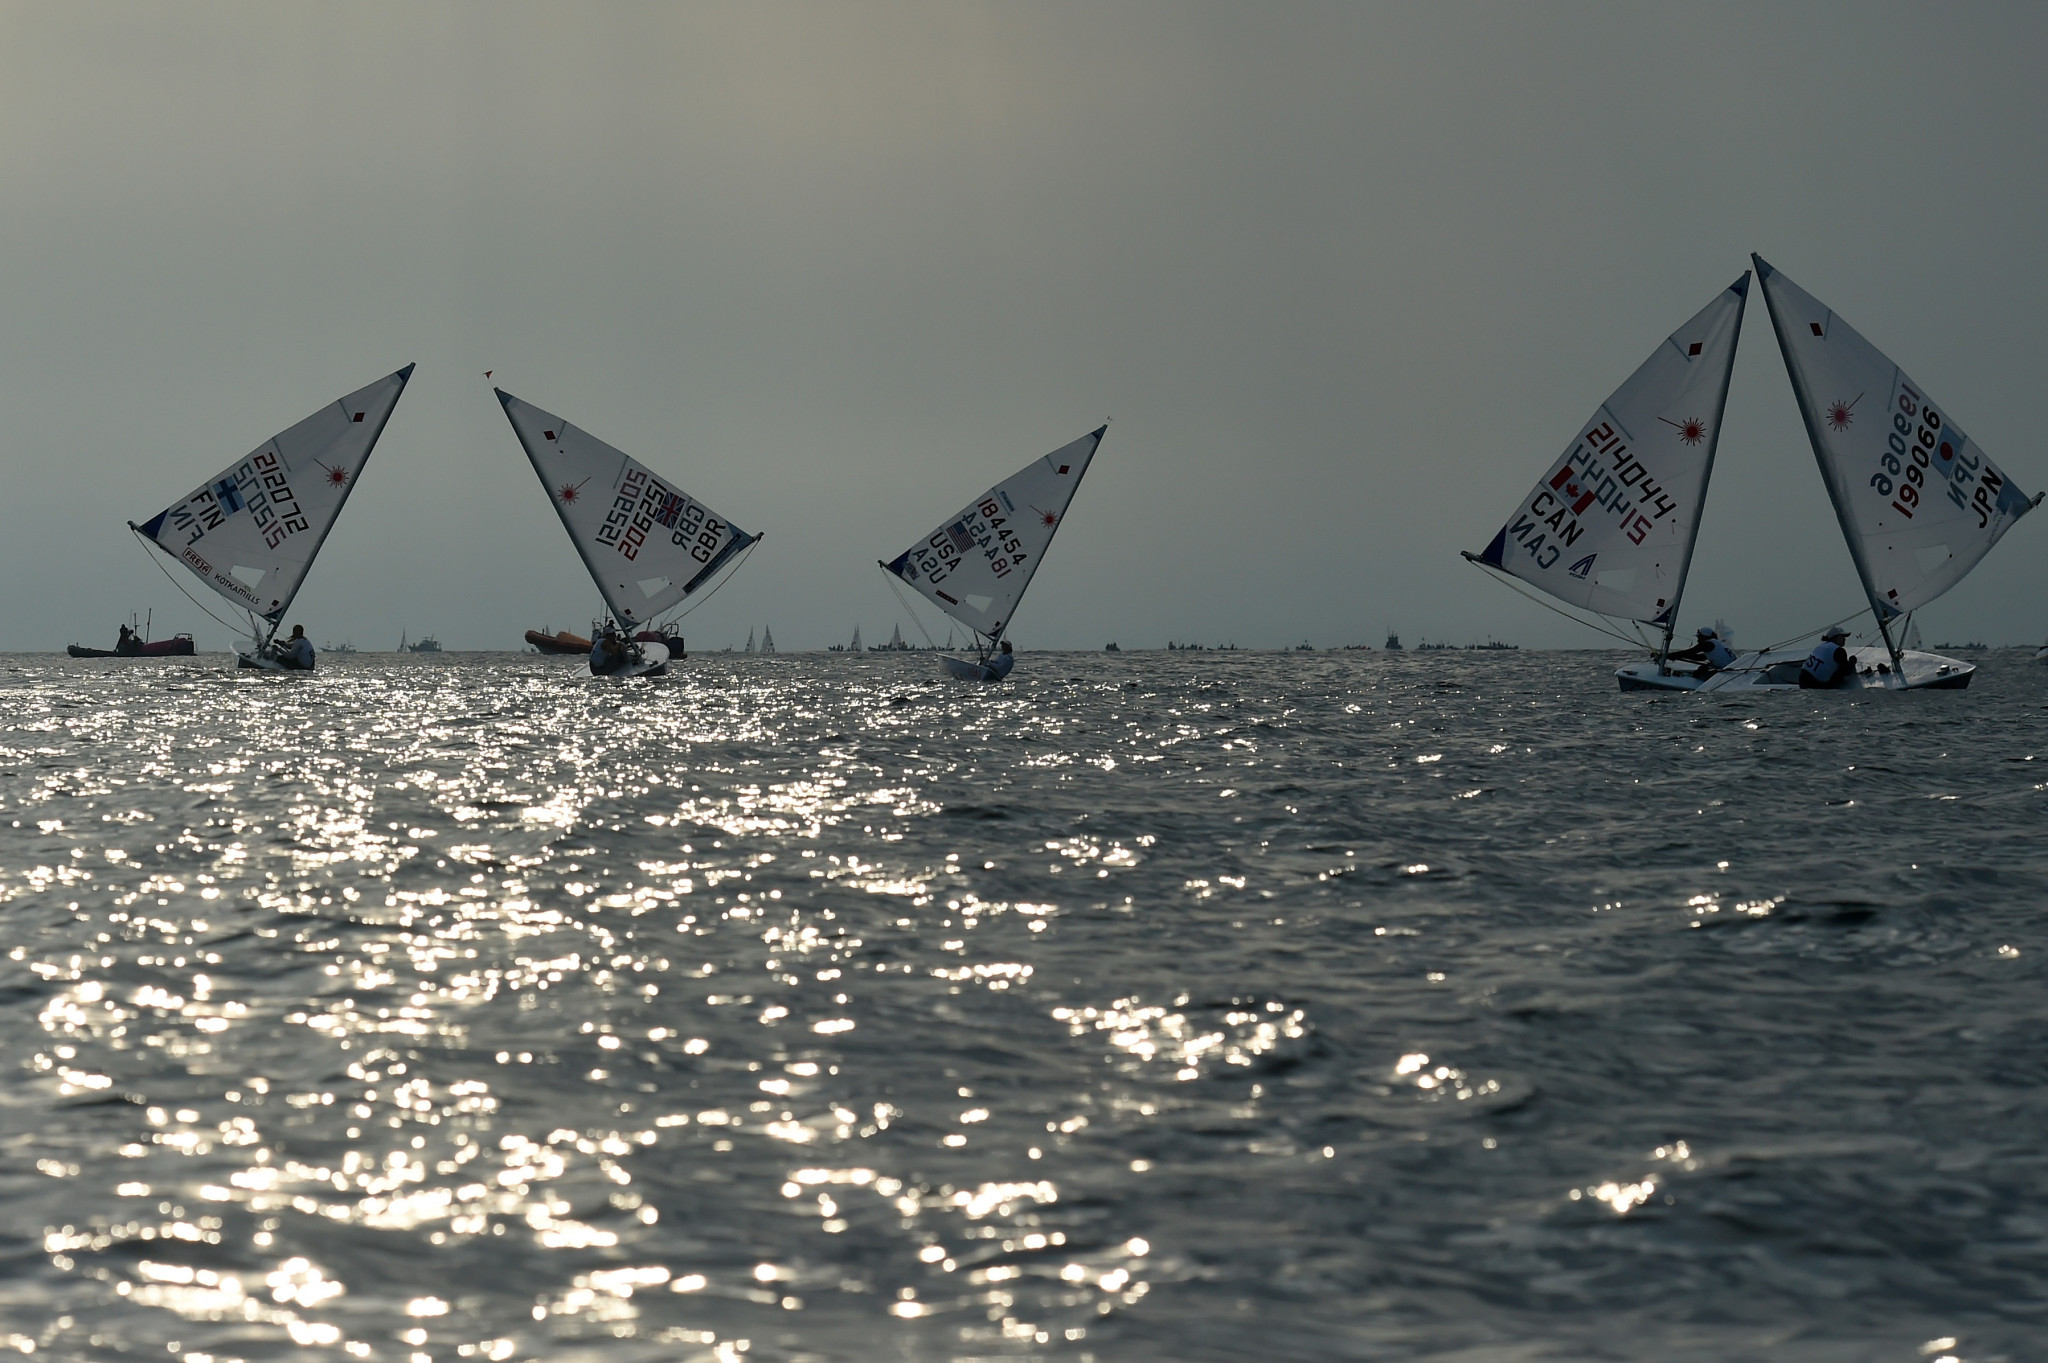 Racing at Laser Standard Men's World Championships postponed due to strong winds